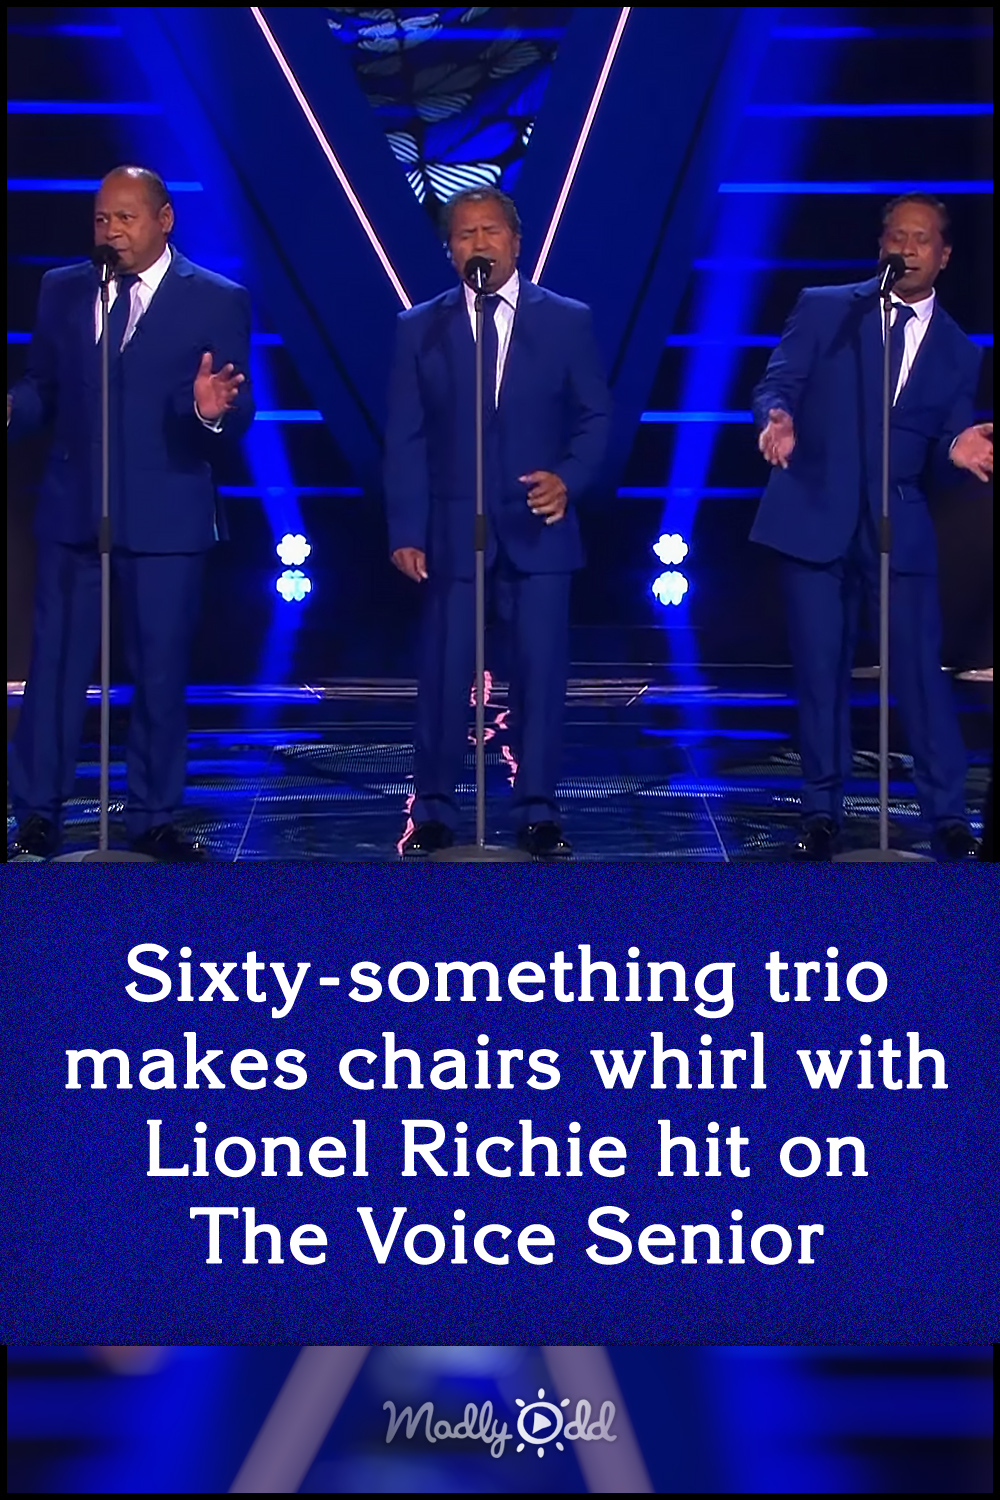 Sixty-something trio makes chairs whirl with Lionel Richie hit on The Voice Senior